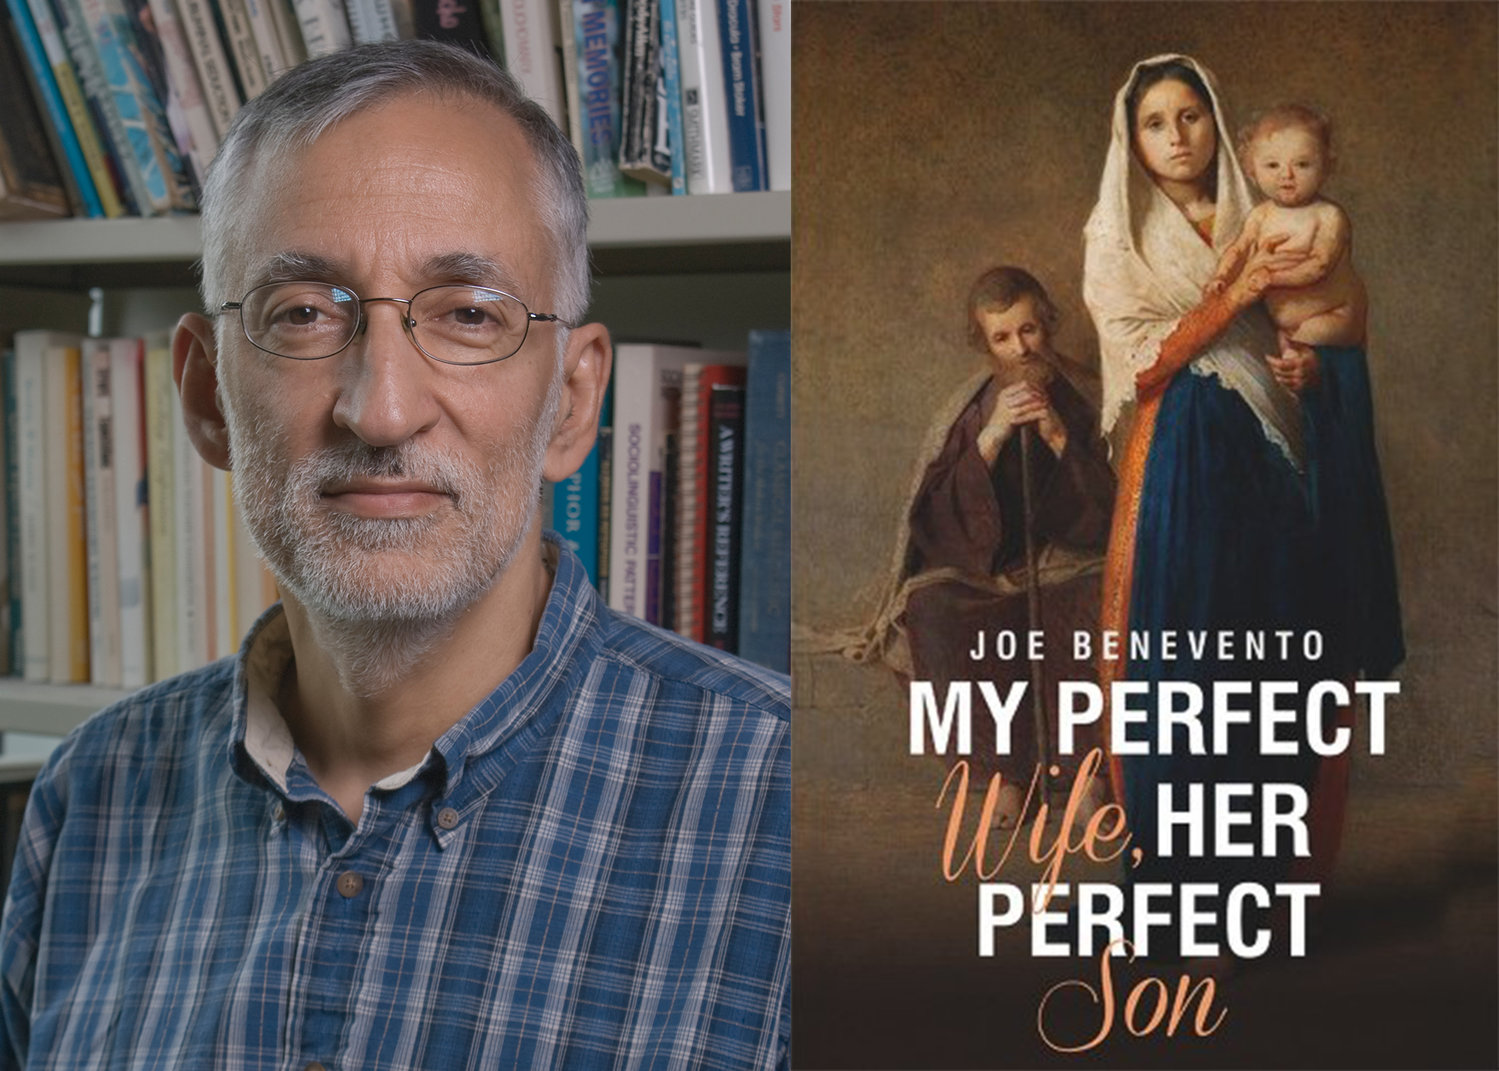 Joseph Benevento PhD is author of 16 books, including My Perfect Wife, Her Perfect Son.